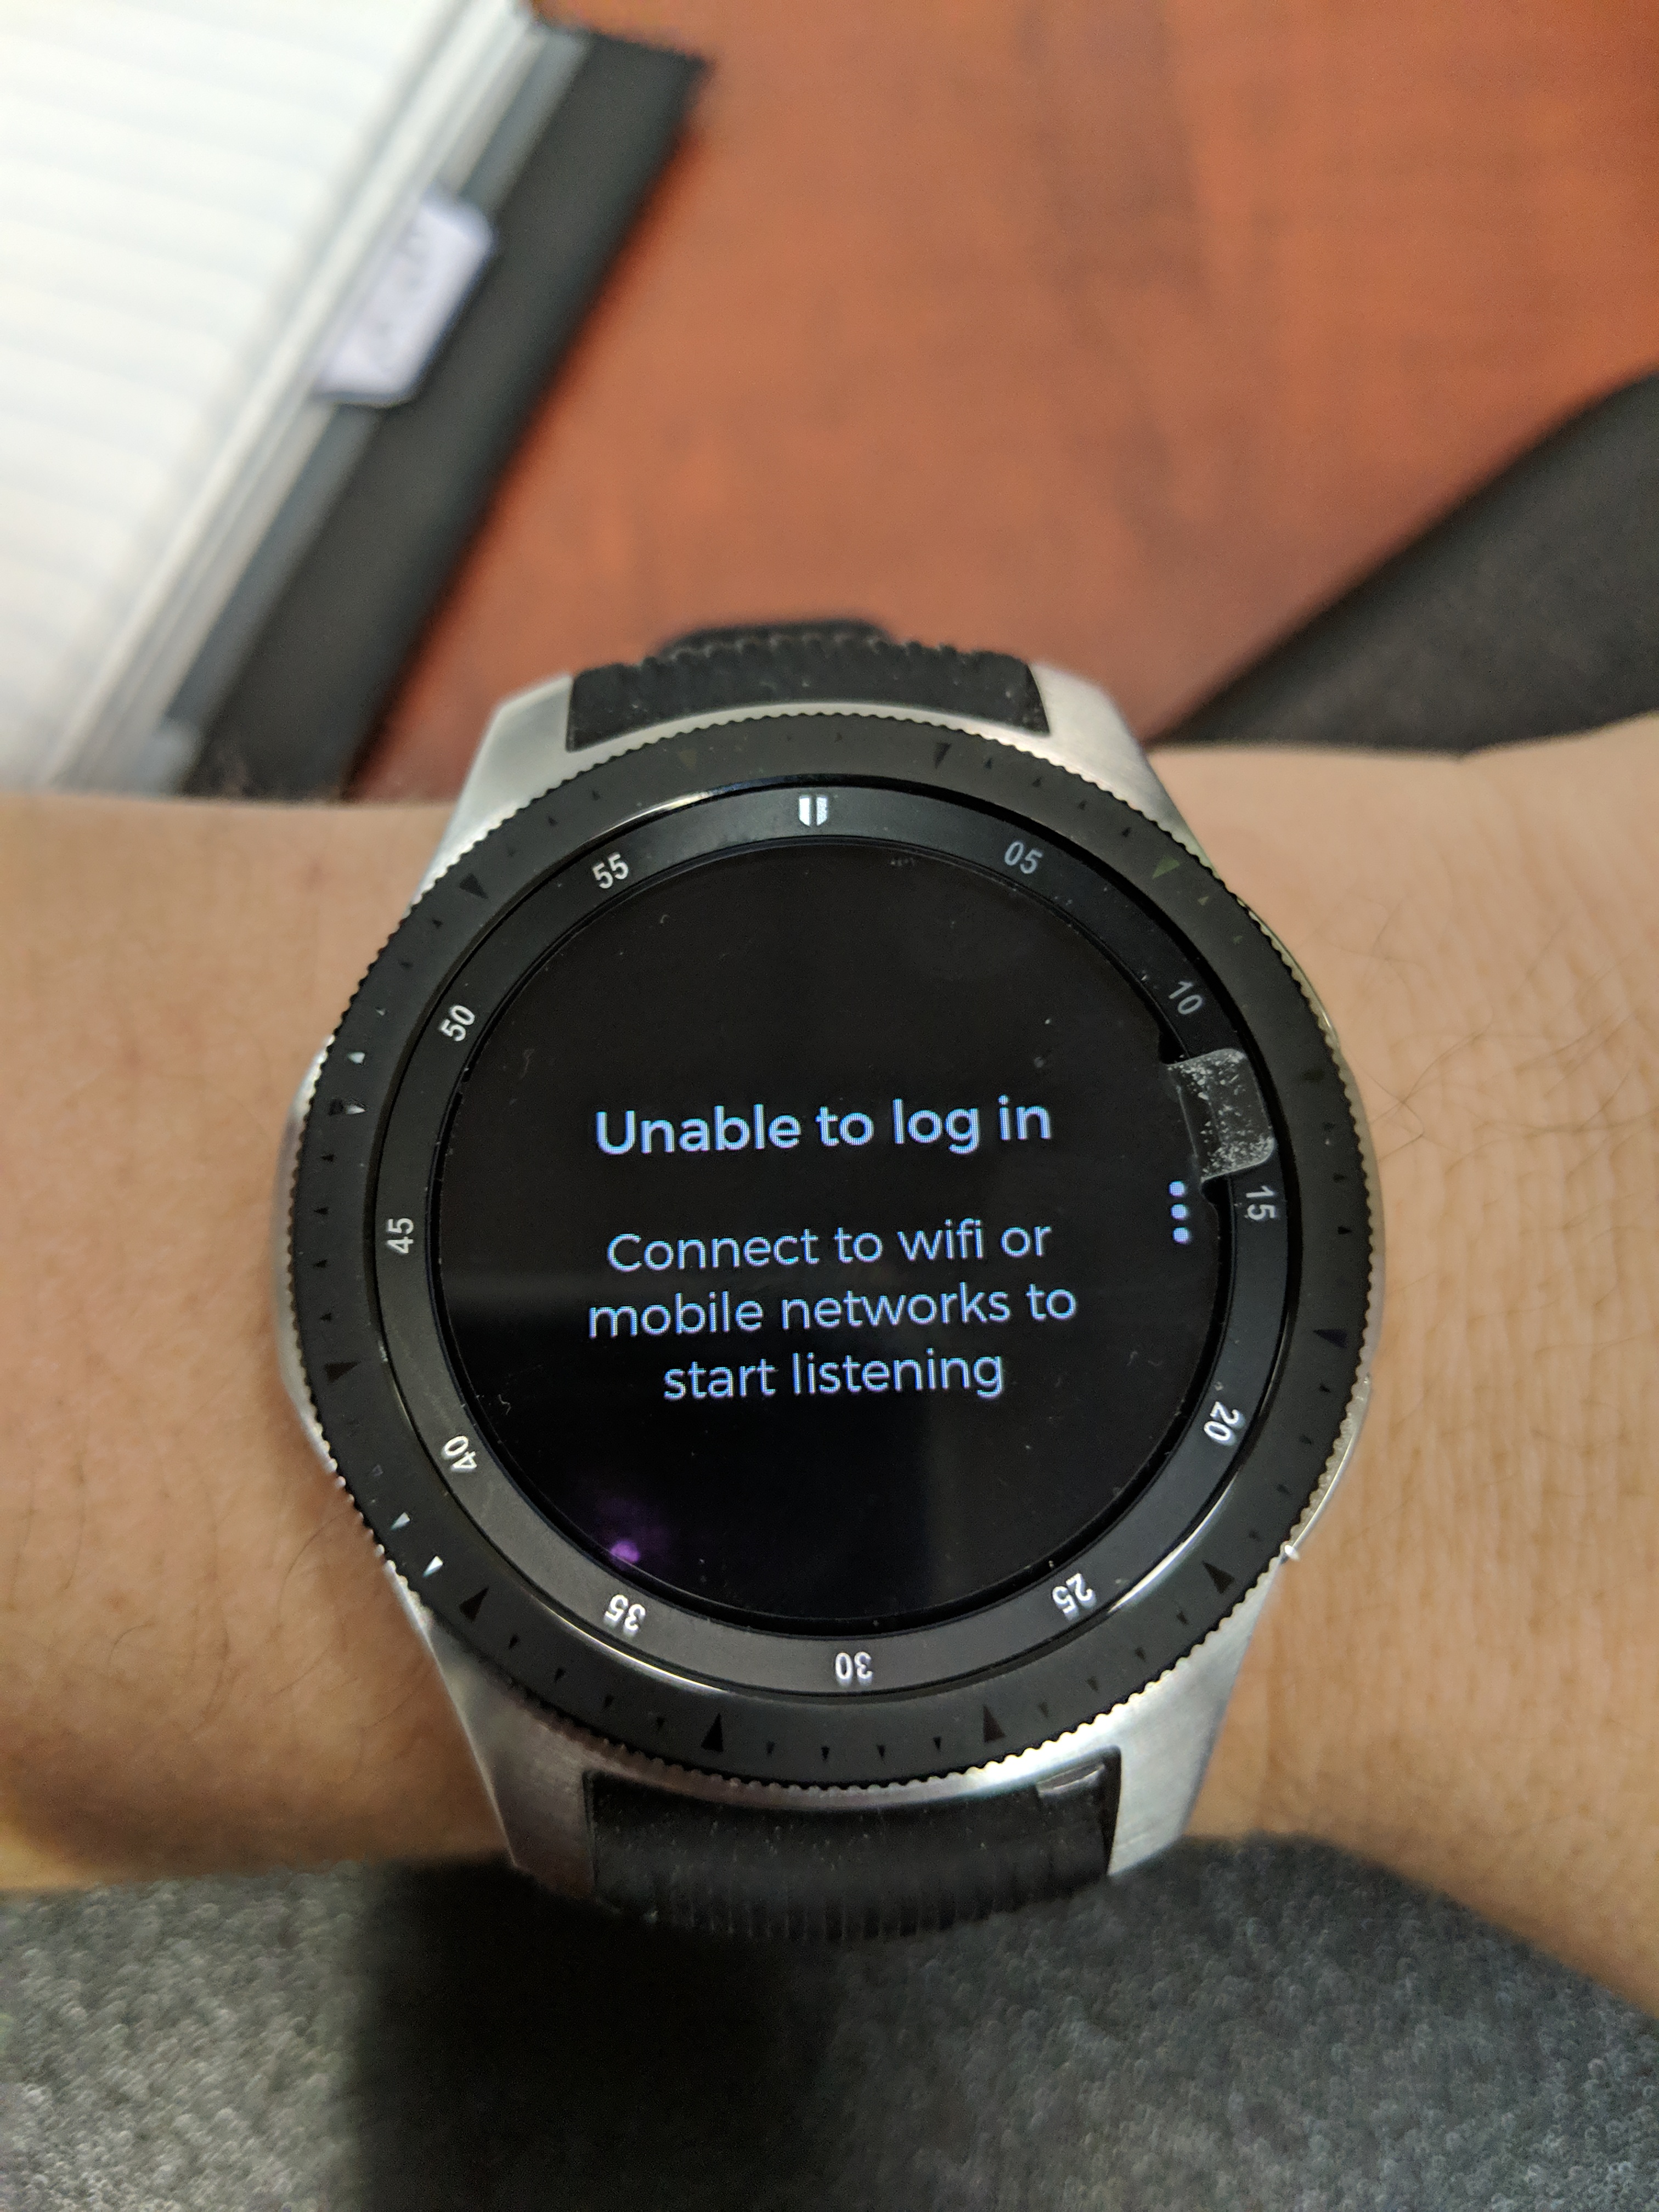 Log in to Free Account on Galaxy Watch 